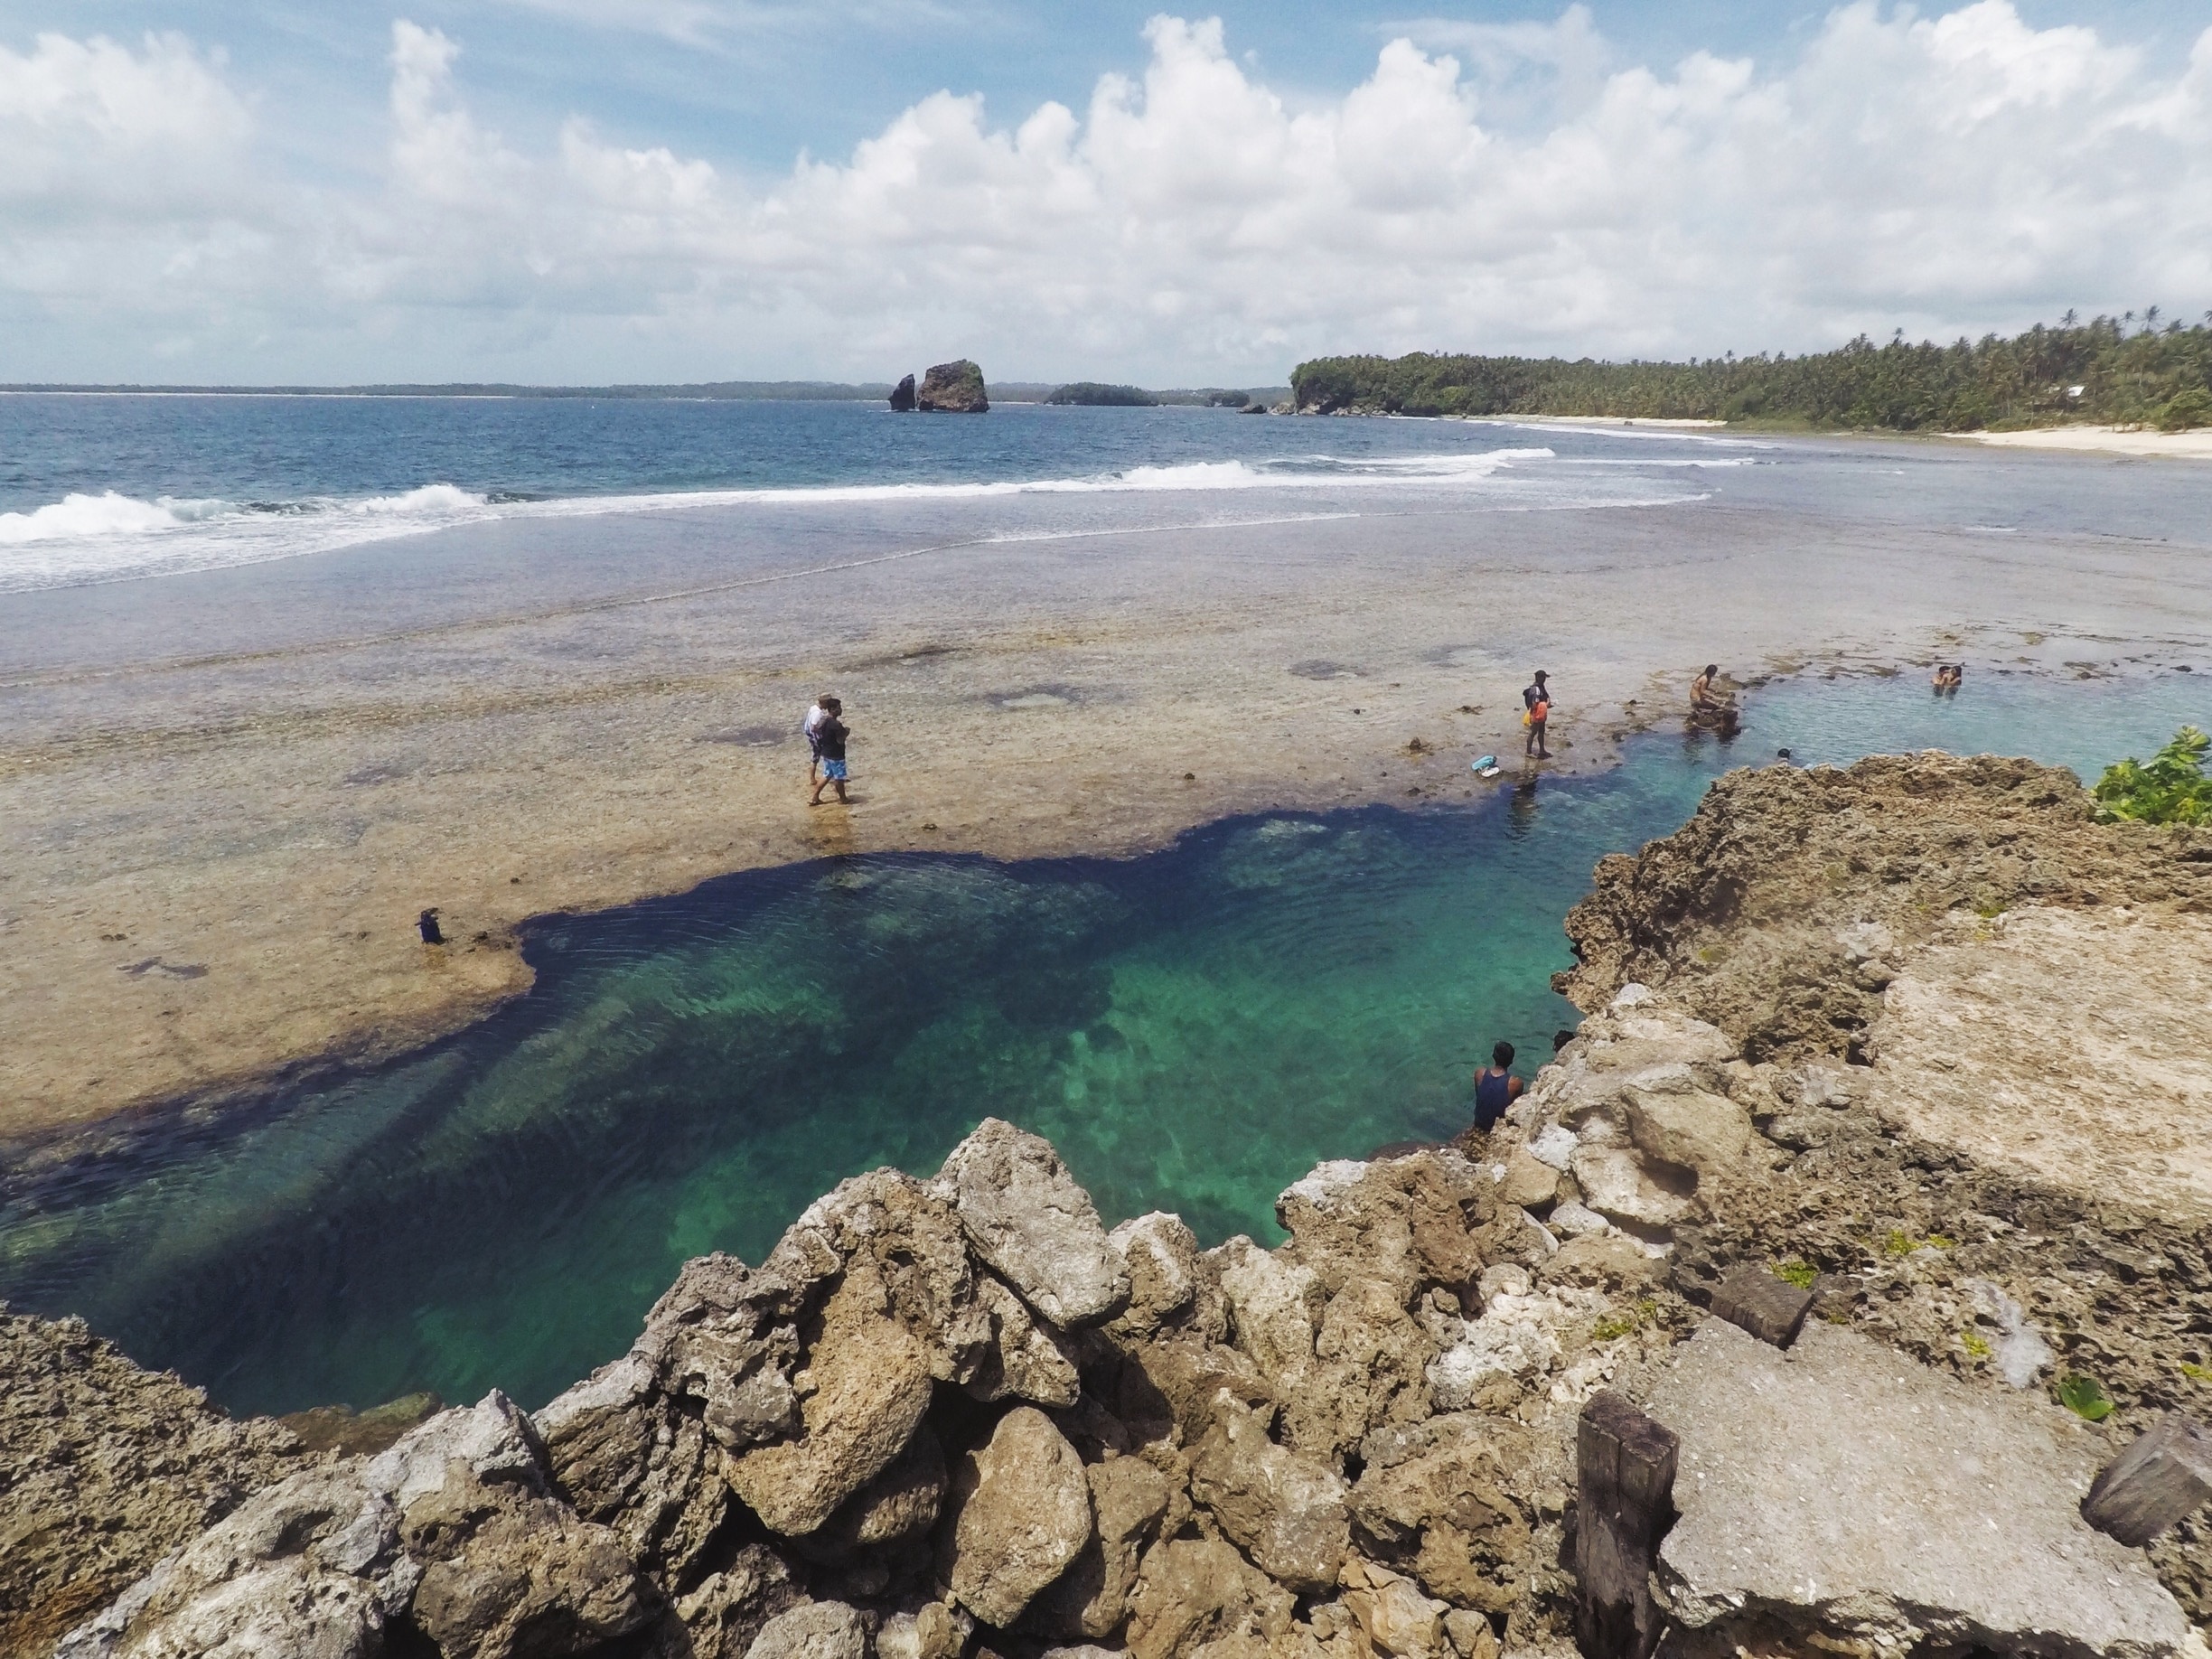 A visit to Siargao Island will not be complete without taking a dip into these rock pools. Appearing during low tide, these pools are perfect for an early morning swim. Have an adventurous spirit? Climb up the rocky cliff and jump your way down to the refreshing, crystal clear water. 

Entrance fee: 50php

#TroveOn
#Siargao
#Choosephilippines
#AquaTrove